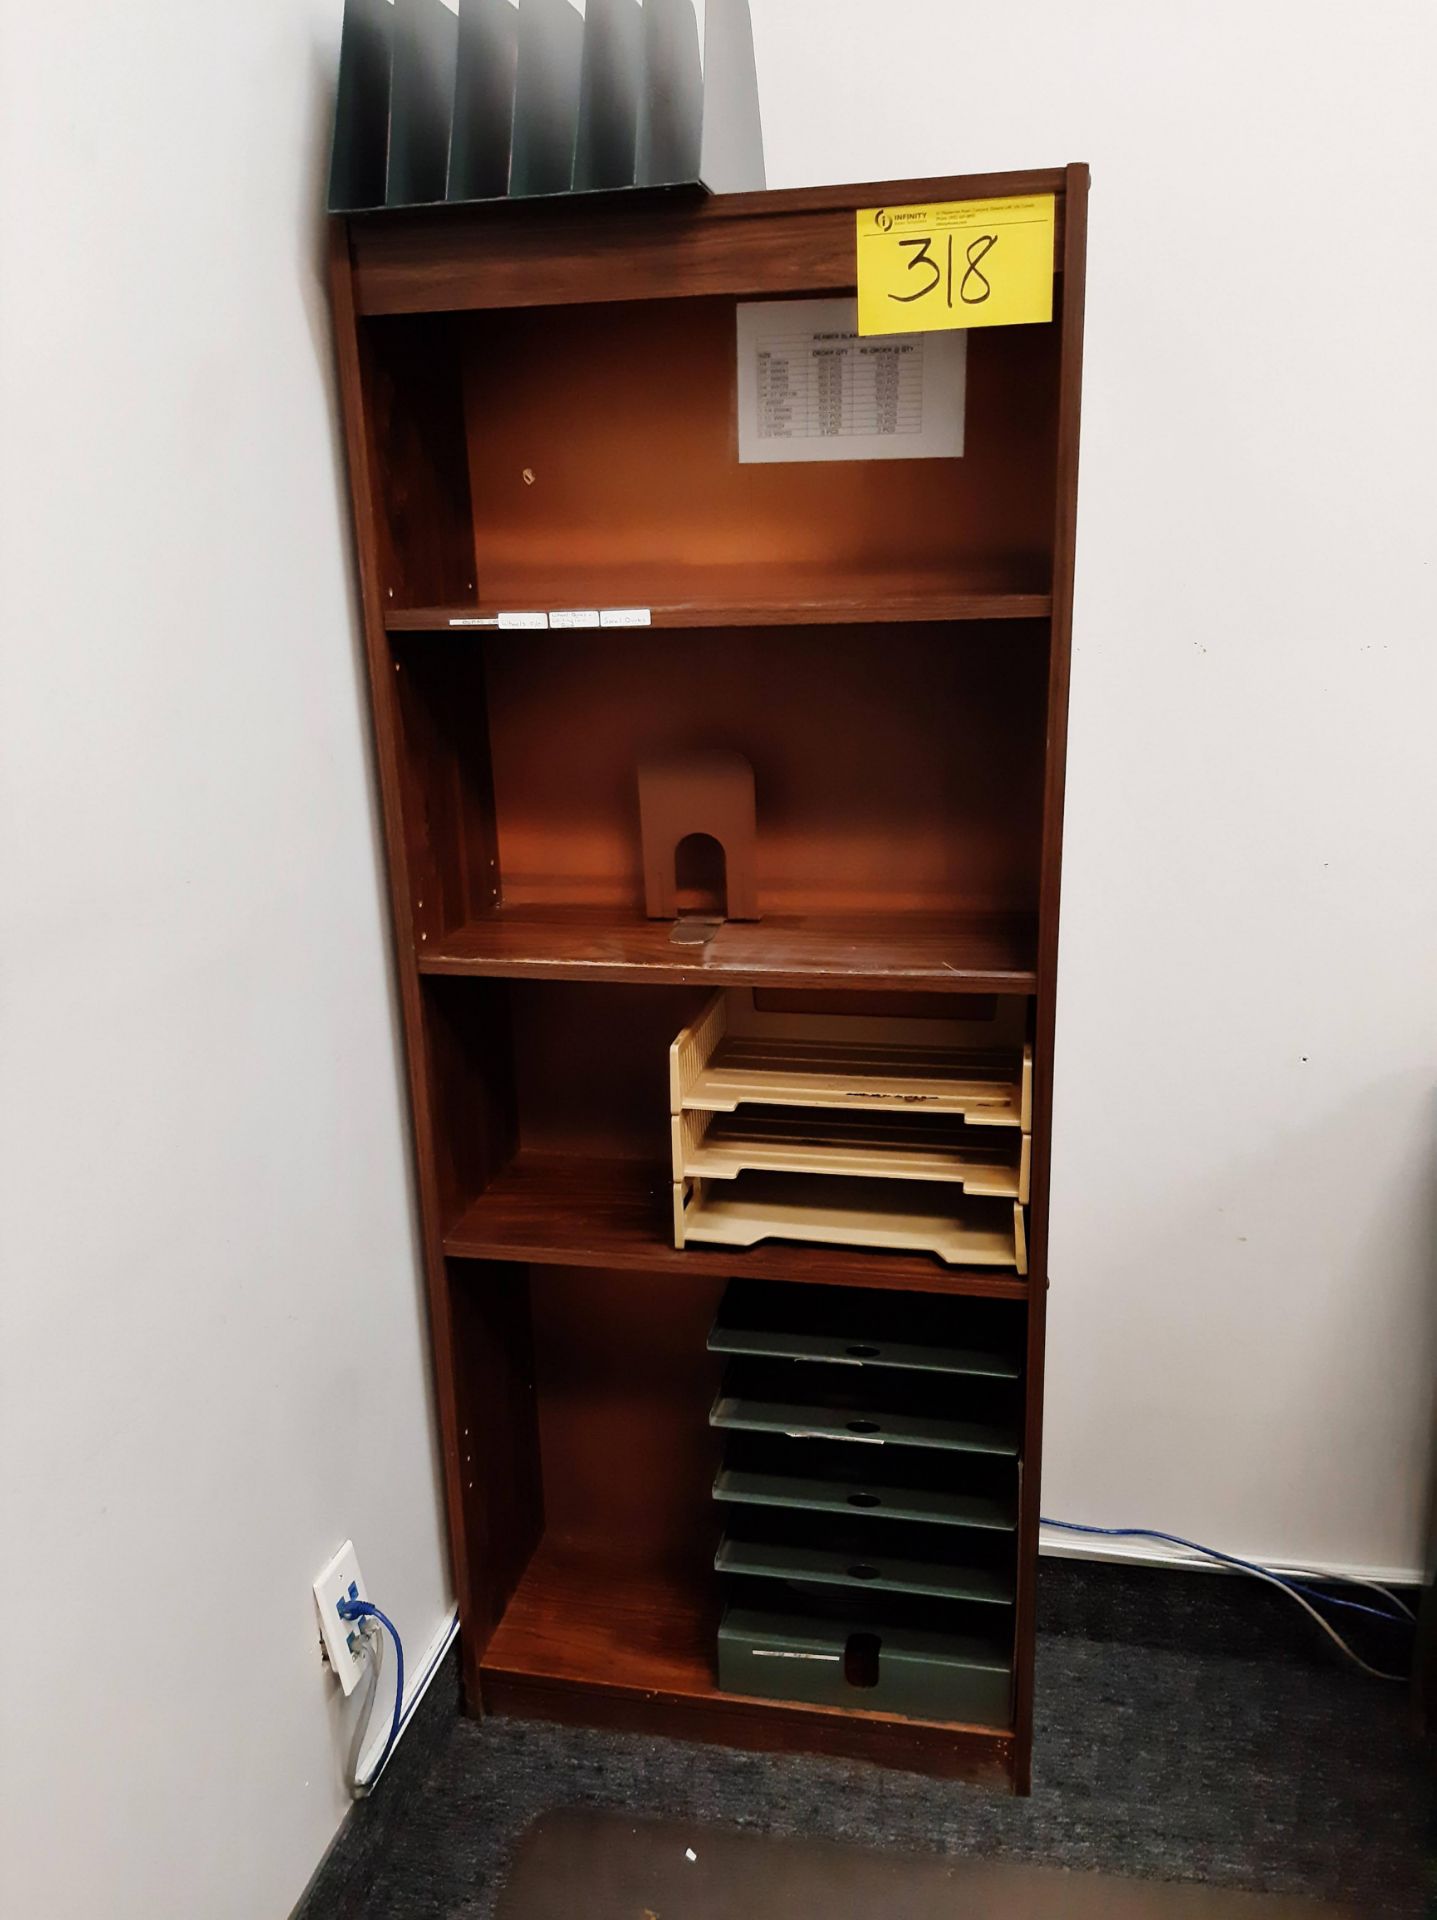 LOT OF (3) STEEL DESKS, BOOKCASE, CHAIR, FILE CABINET - Image 3 of 4